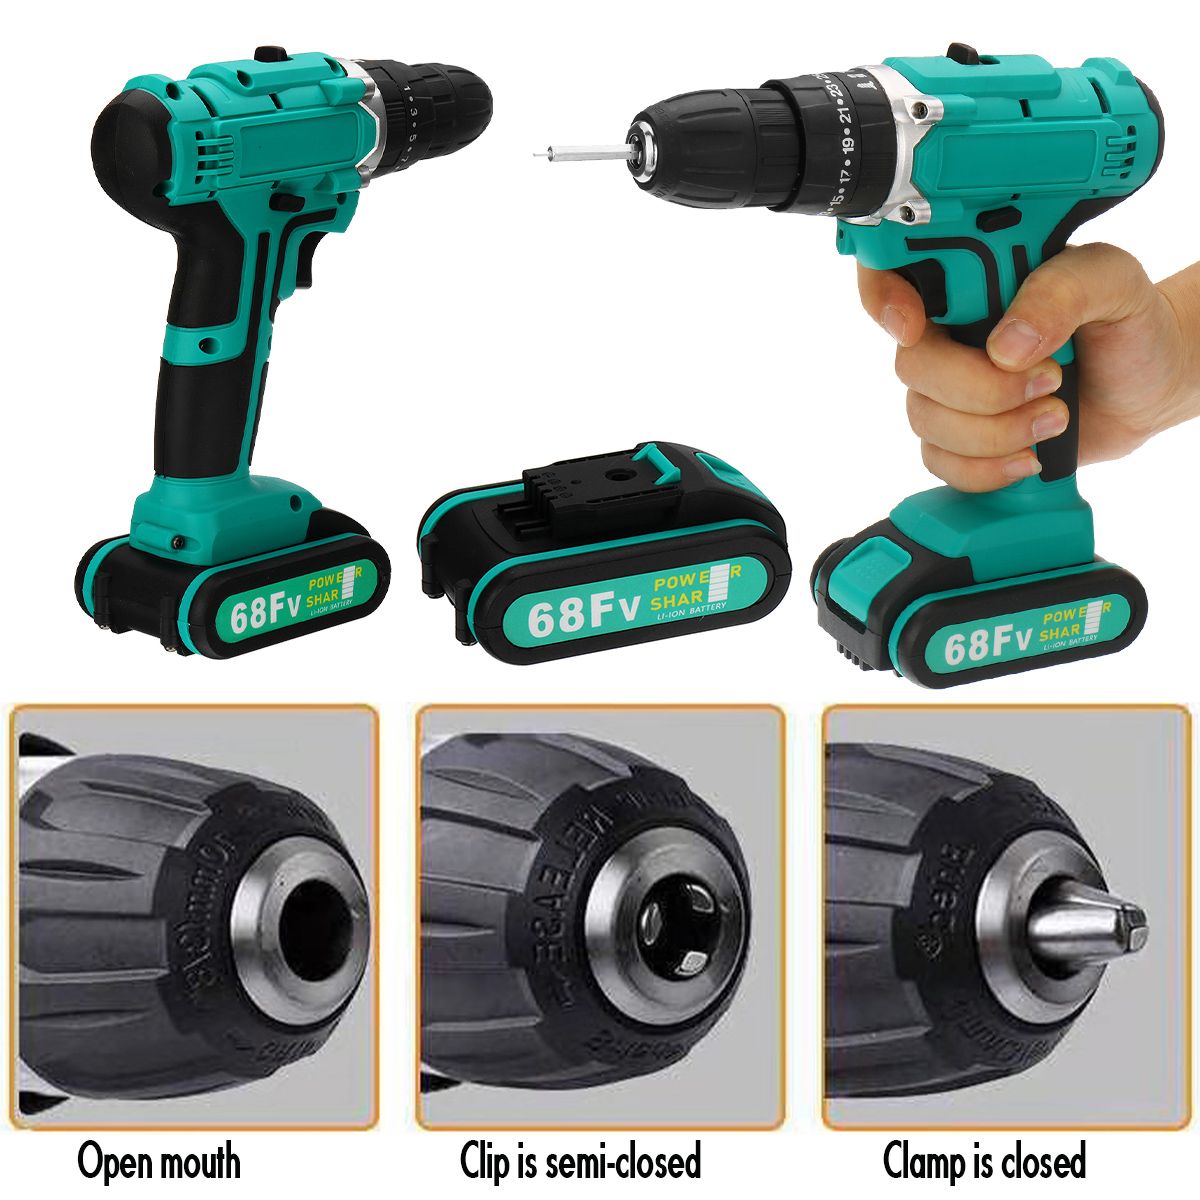 68FV-Household-Lithium-Electric-Screwdriver-2-Speed-Impact-Power-Drills-Rechargeable-Drill-Driver-W--1559731